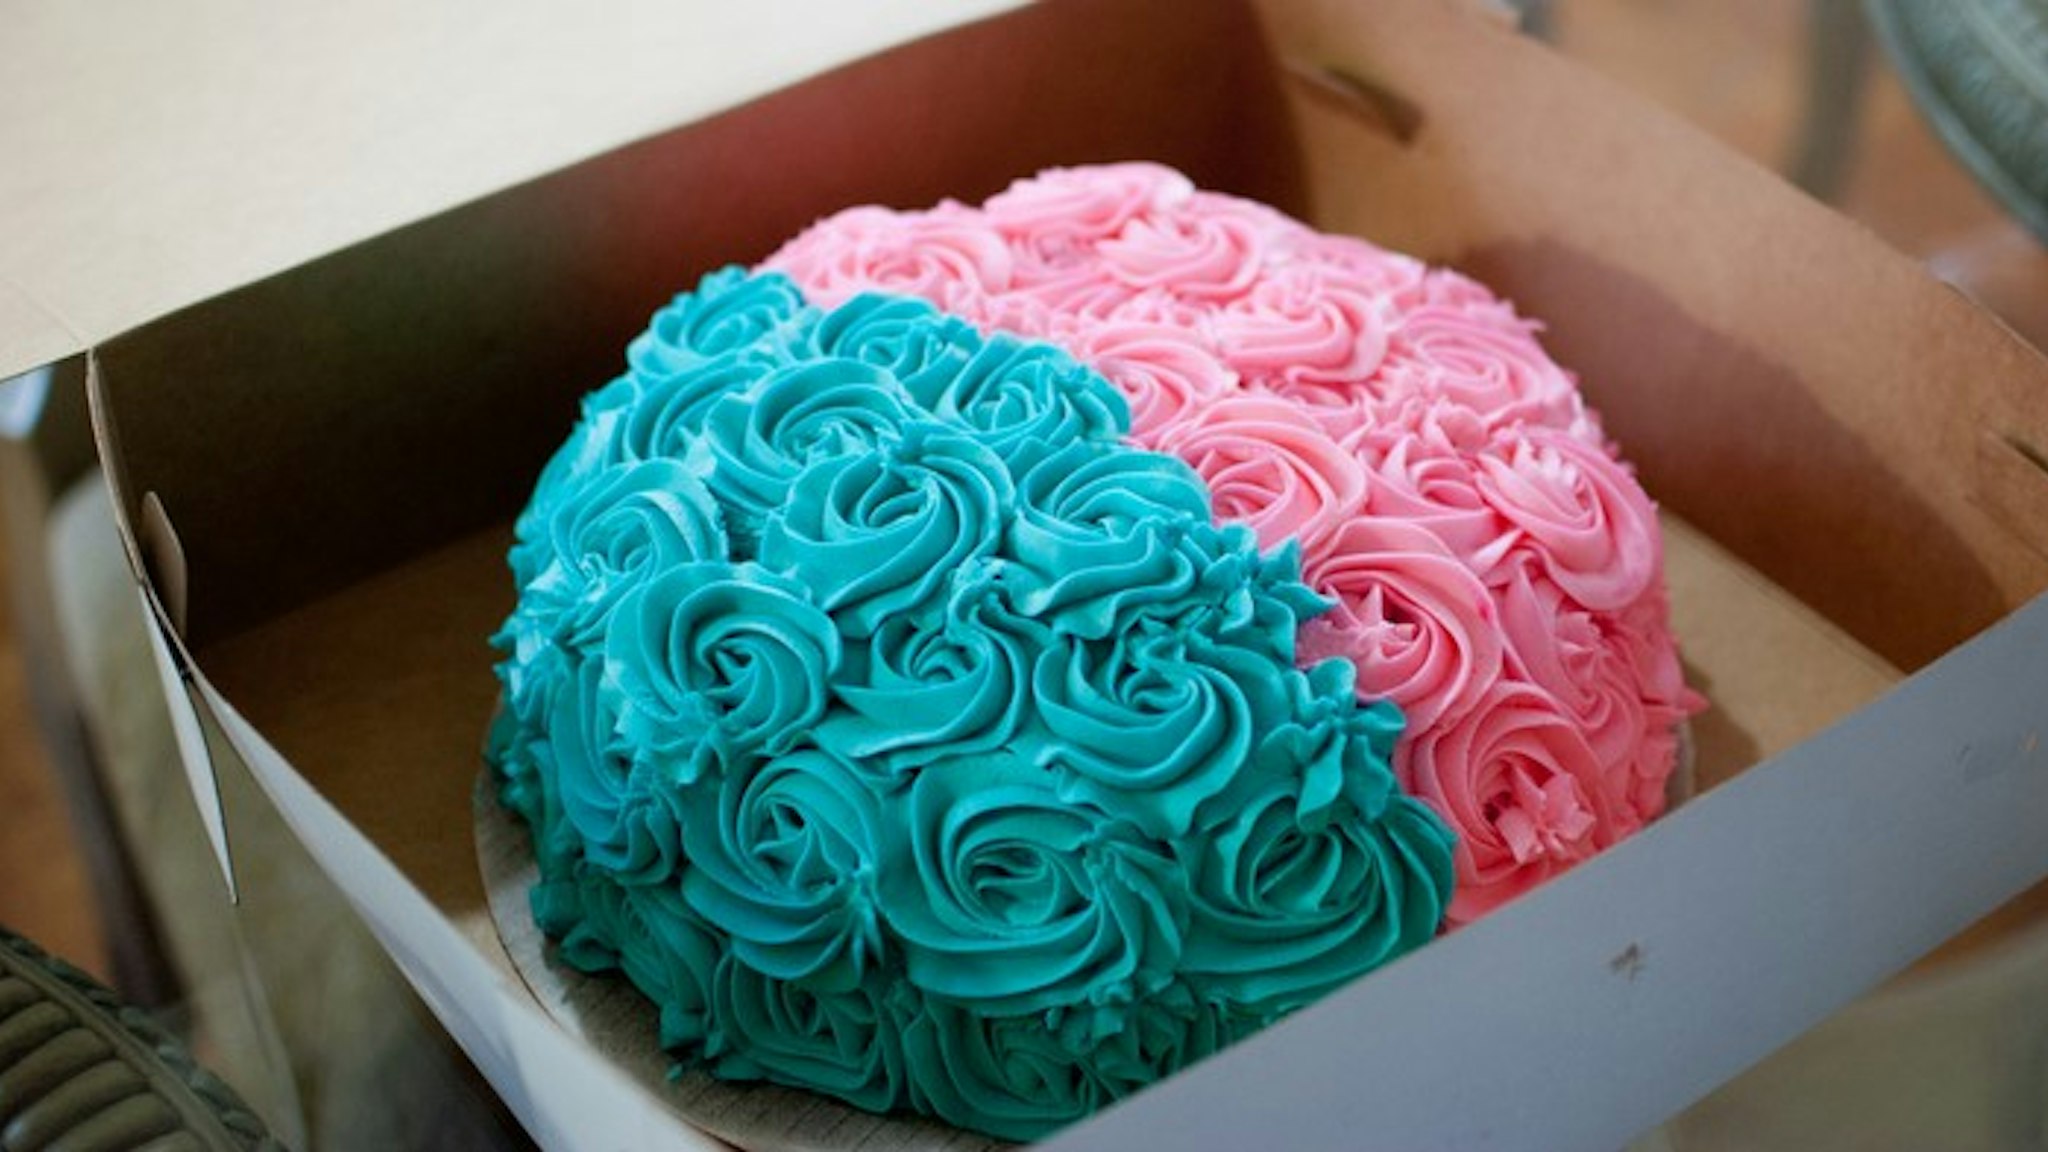 A pink and blue cake used at a gender reveal baby shower.